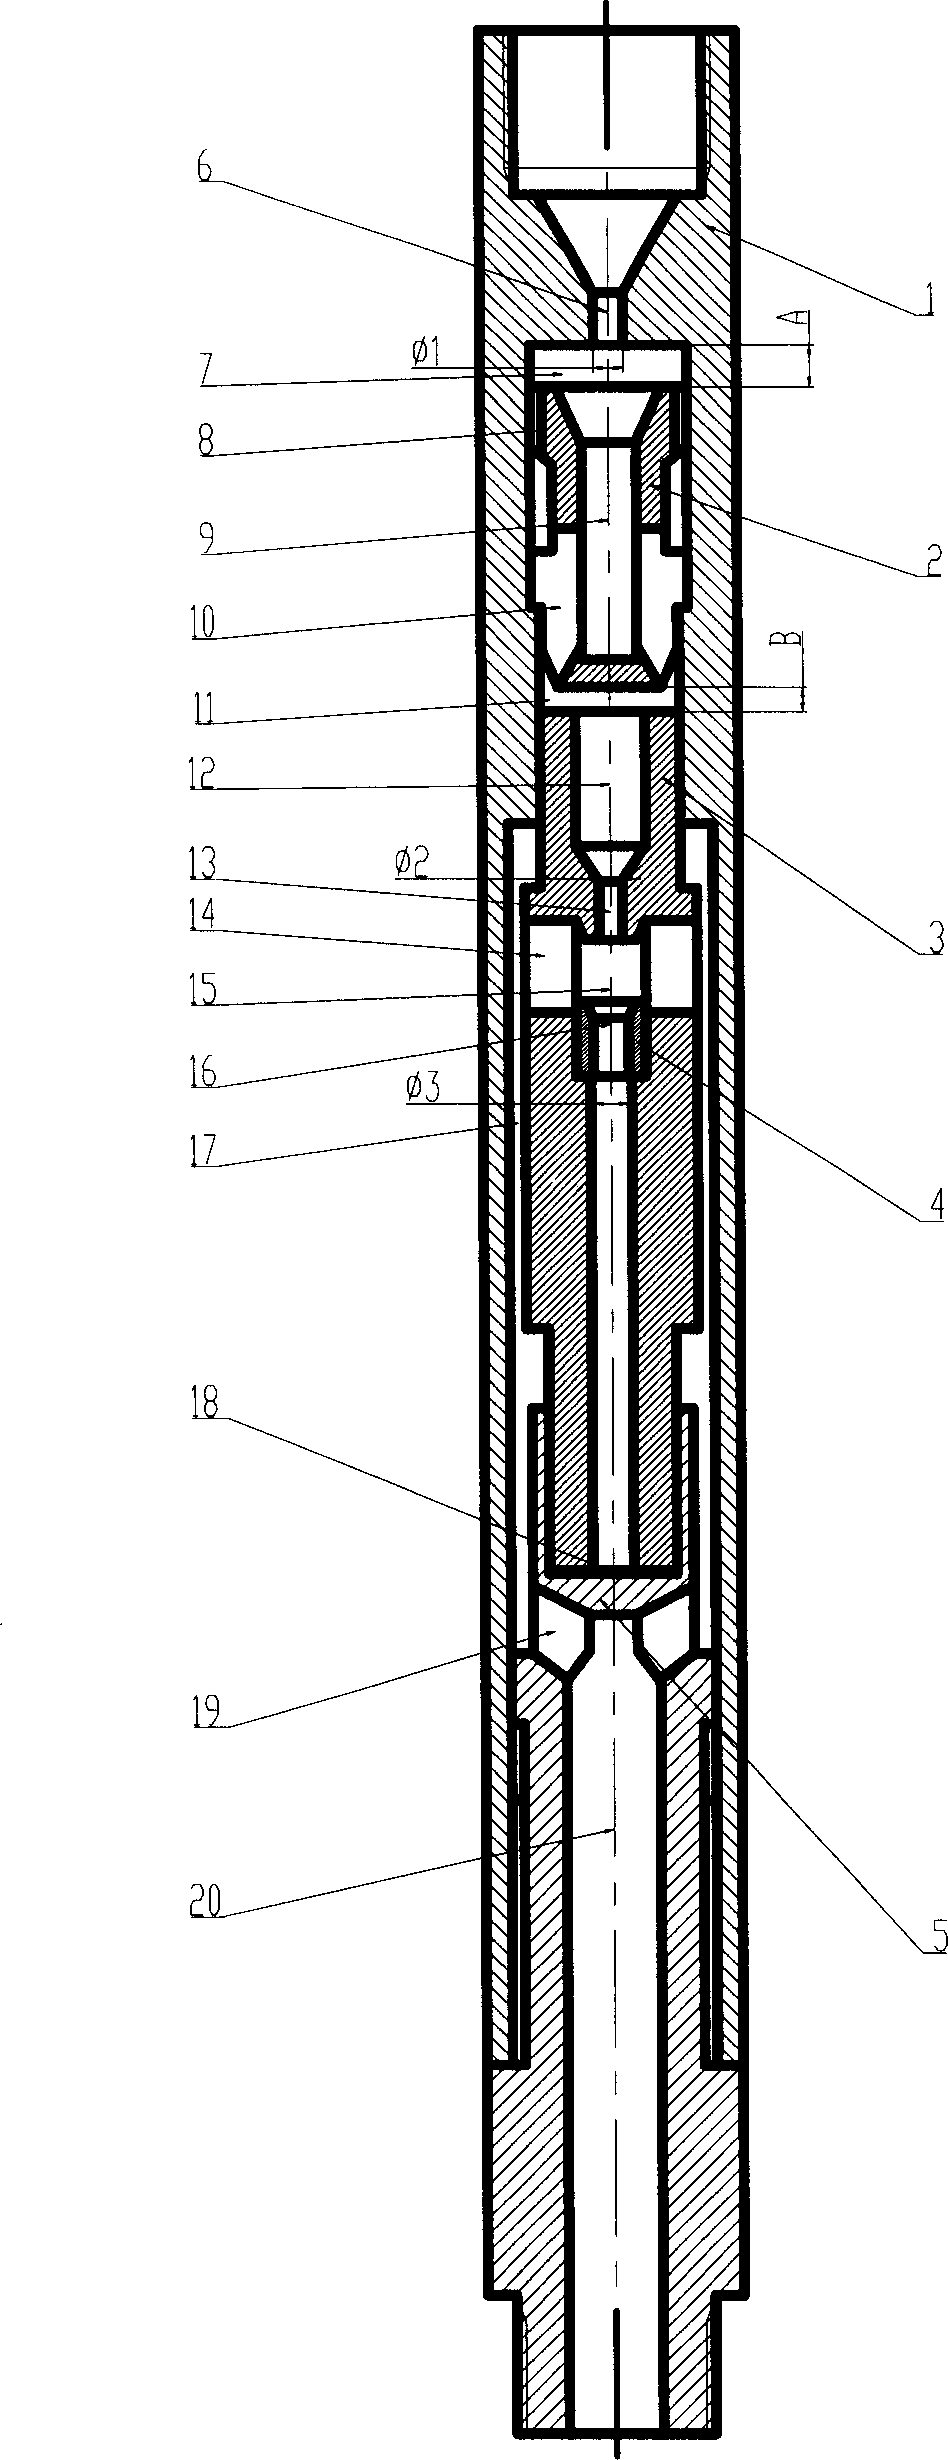 Hydraulic in-the-hole hammer with dual nozzles and combined valve